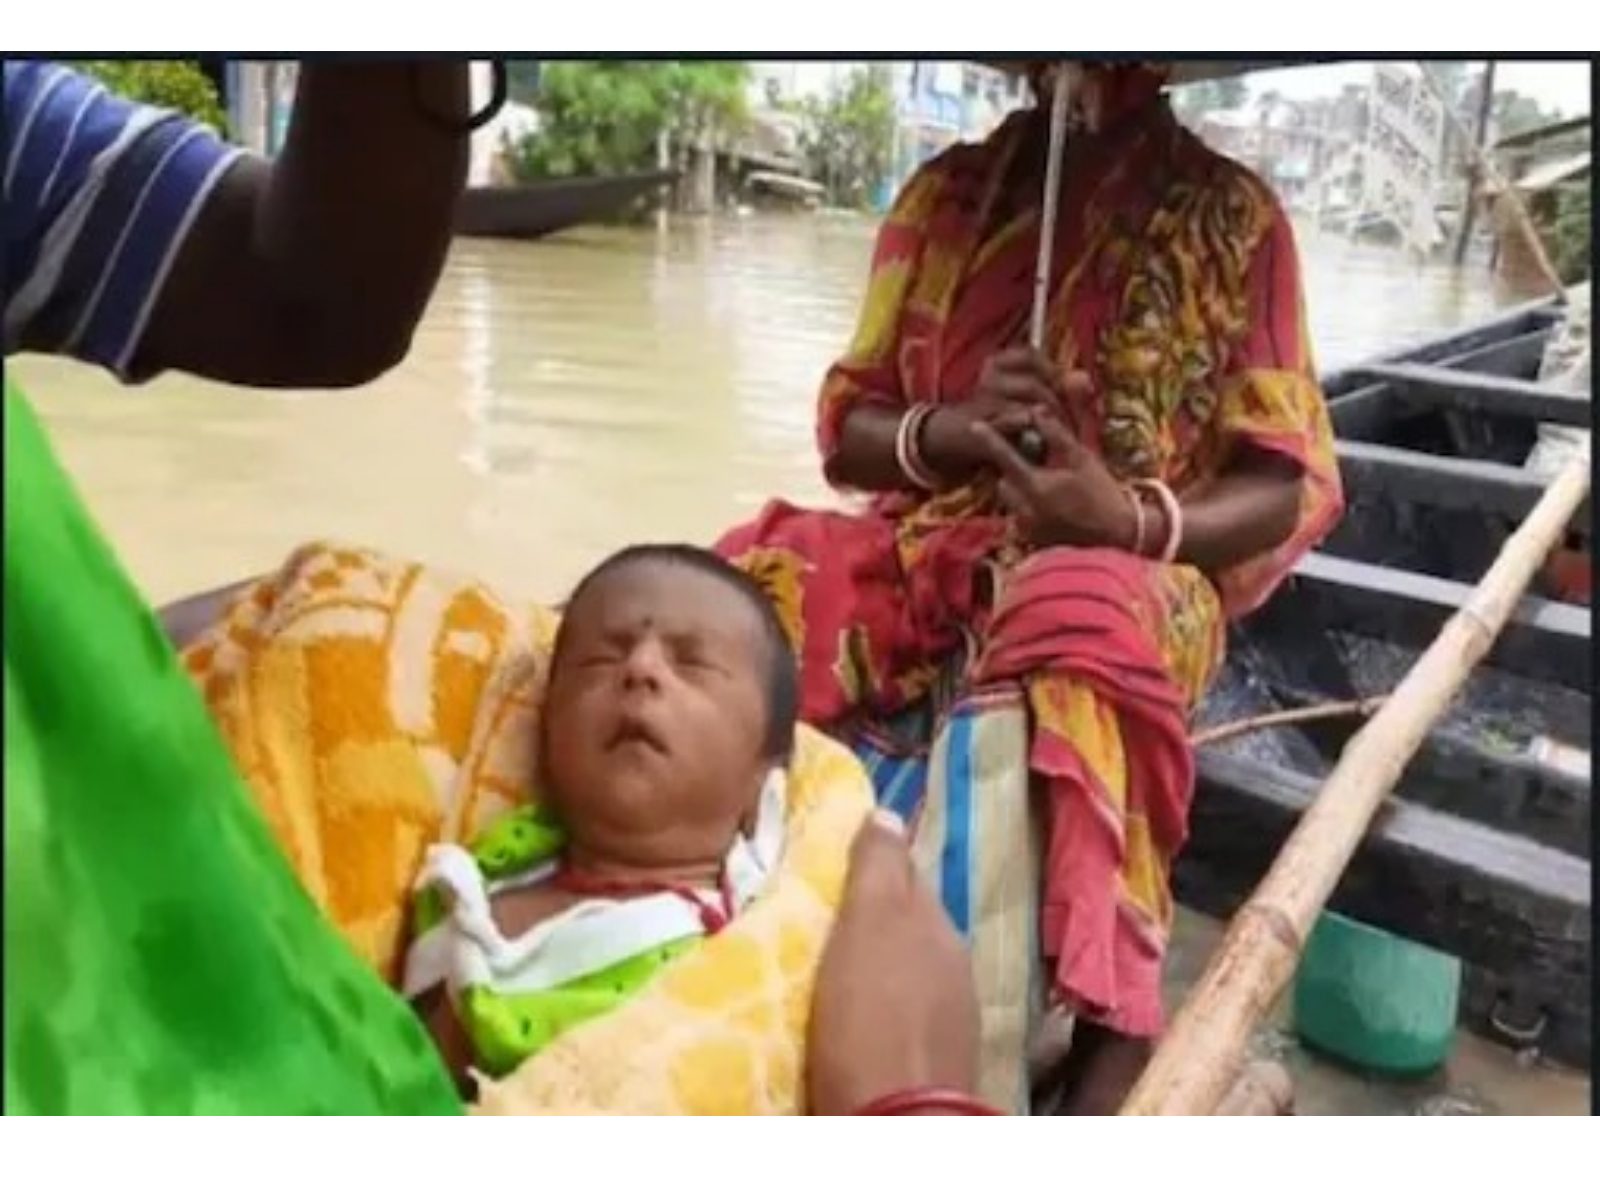 Bengal Floods: Family Takes Shelter on Neighbour's Terrace With 11-Month-Old Baby